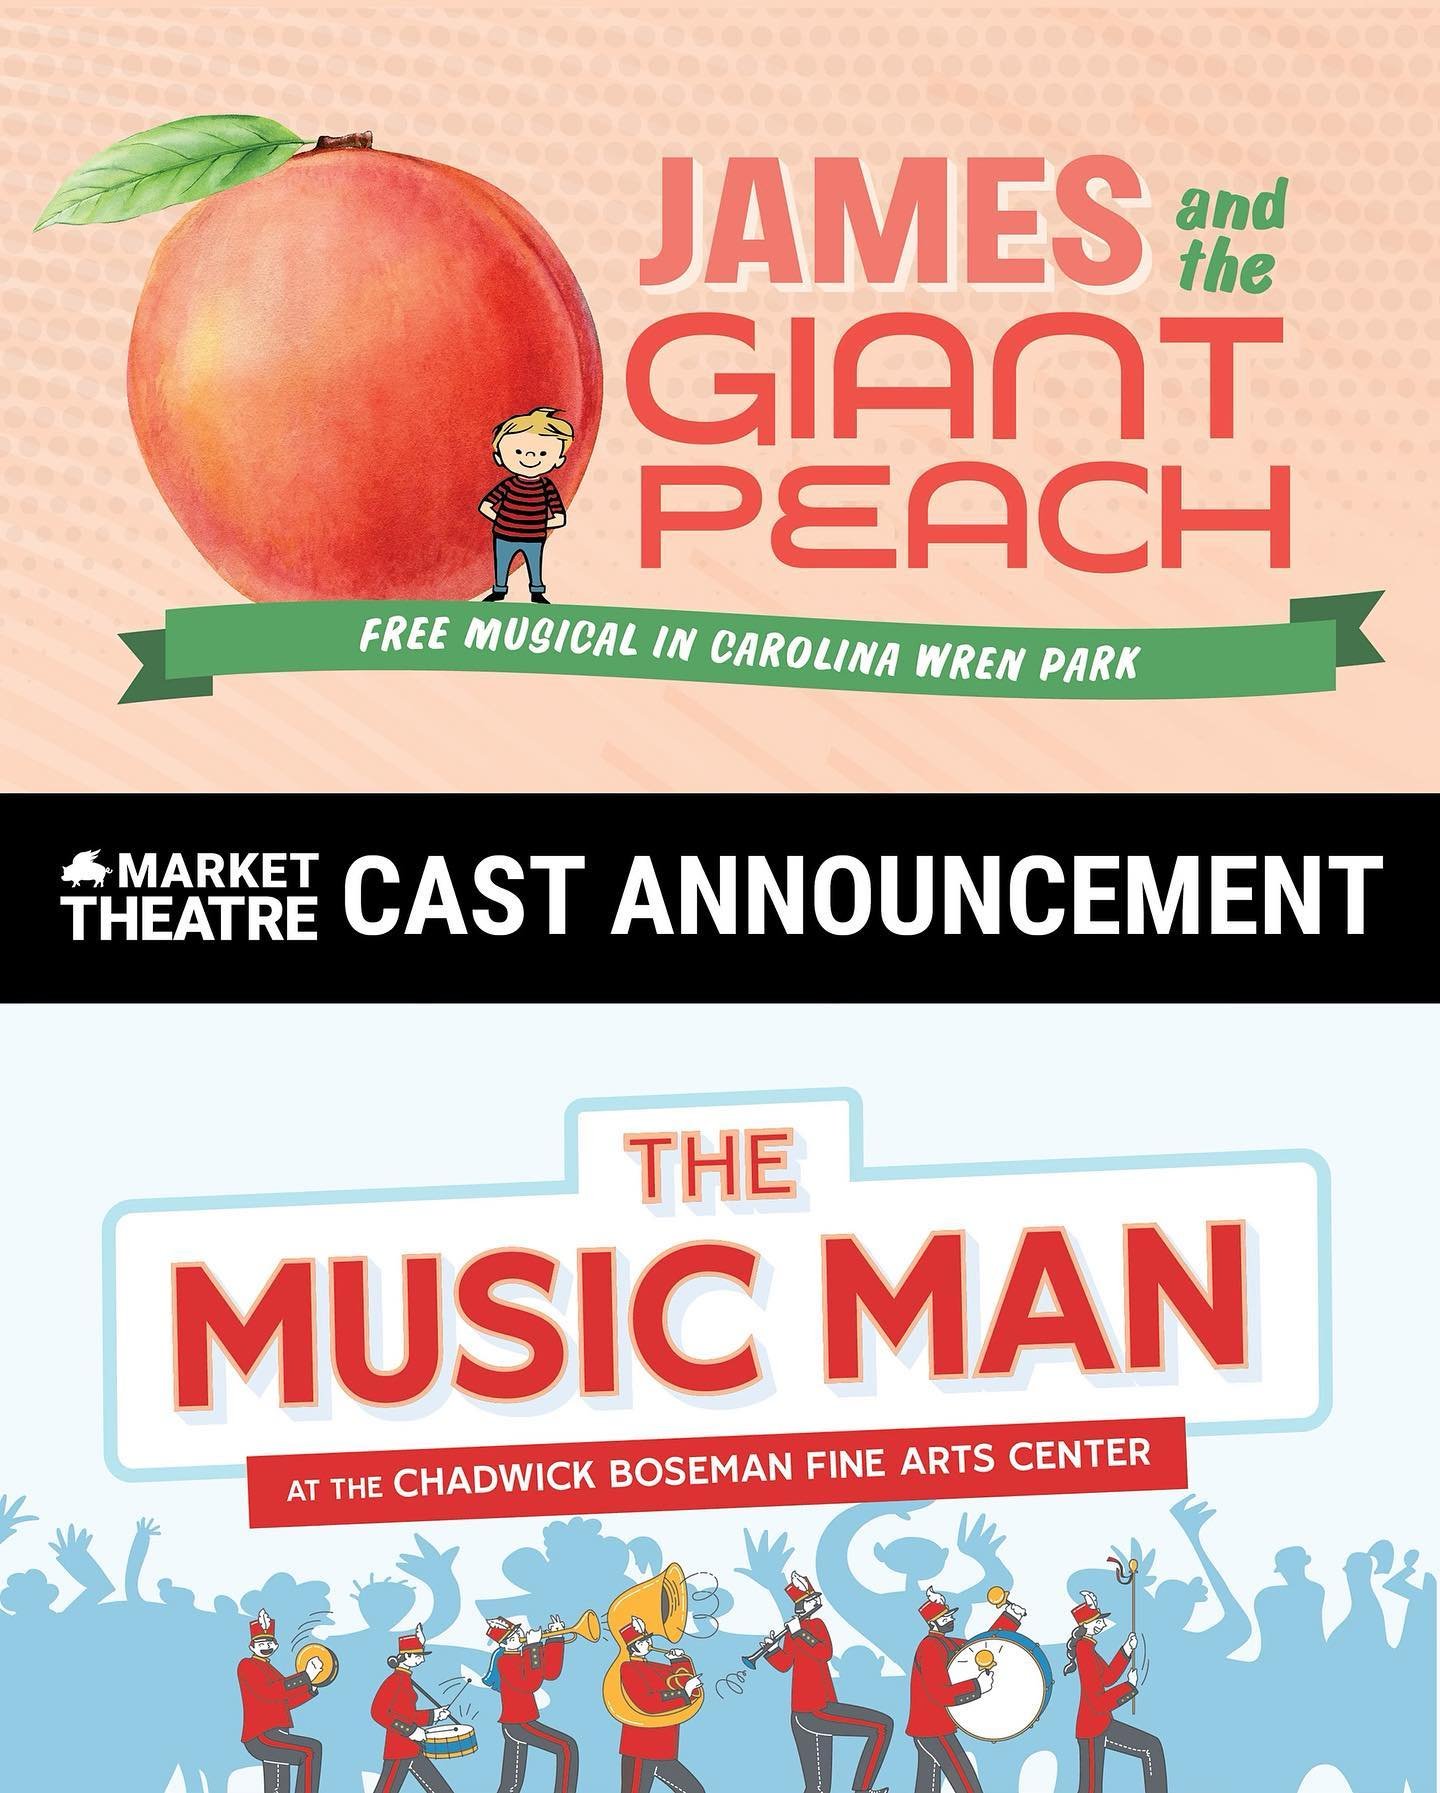 The cast announcements keep coming this week! 🤩 Presenting to you the casts of JAMES AND THE GIANT PEACH &amp; THE MUSIC MAN! 

We cannot wait to bring JAMES to one of our audiences favorite spaces, Carolina Wren Park, and to present MUSIC MAN in a 